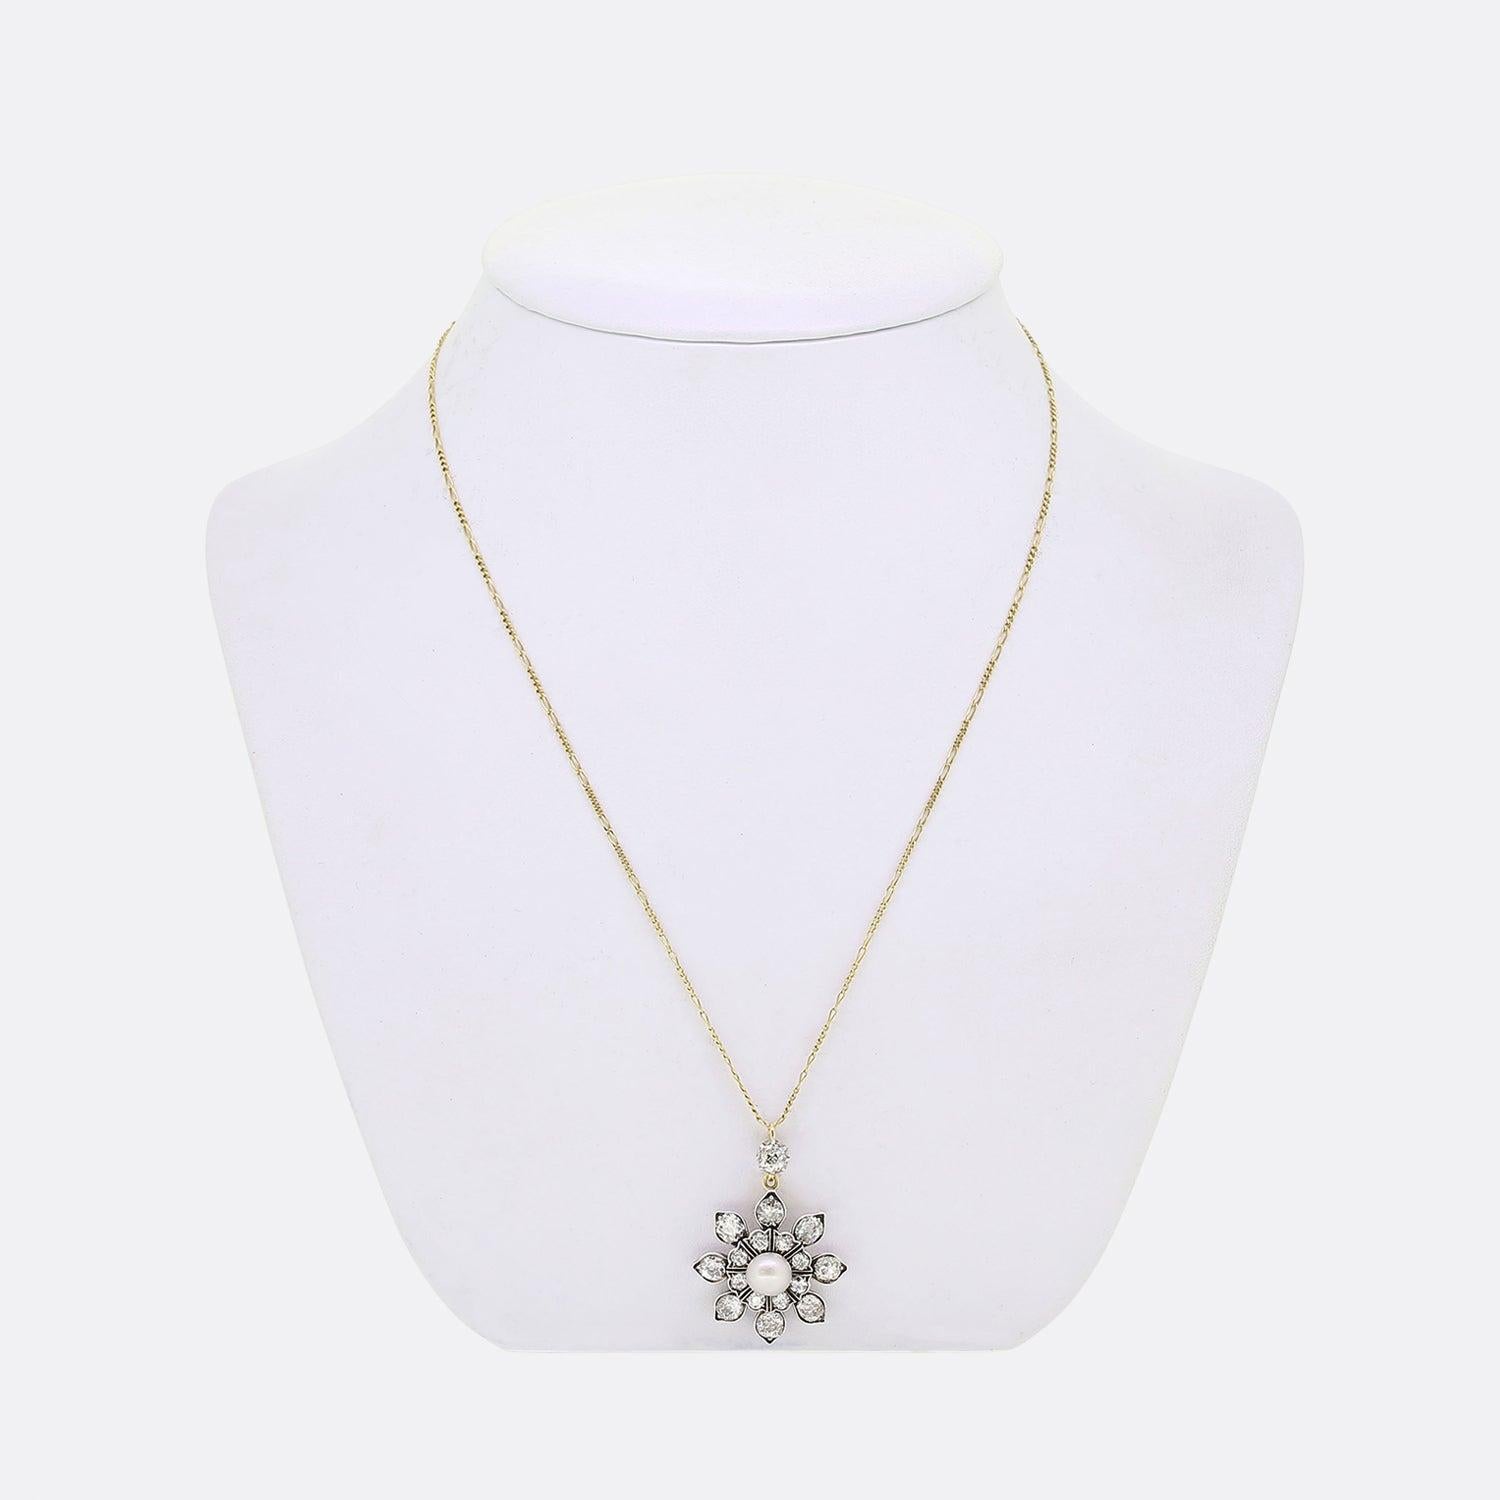 Here we have an exceptionally crafted necklace from the Victorian era. The frame of this multi-layered antique pendant has been formed into the shape of a sunflower with a semi-round natural pearl at the centre. This focal stone possesses a lovely